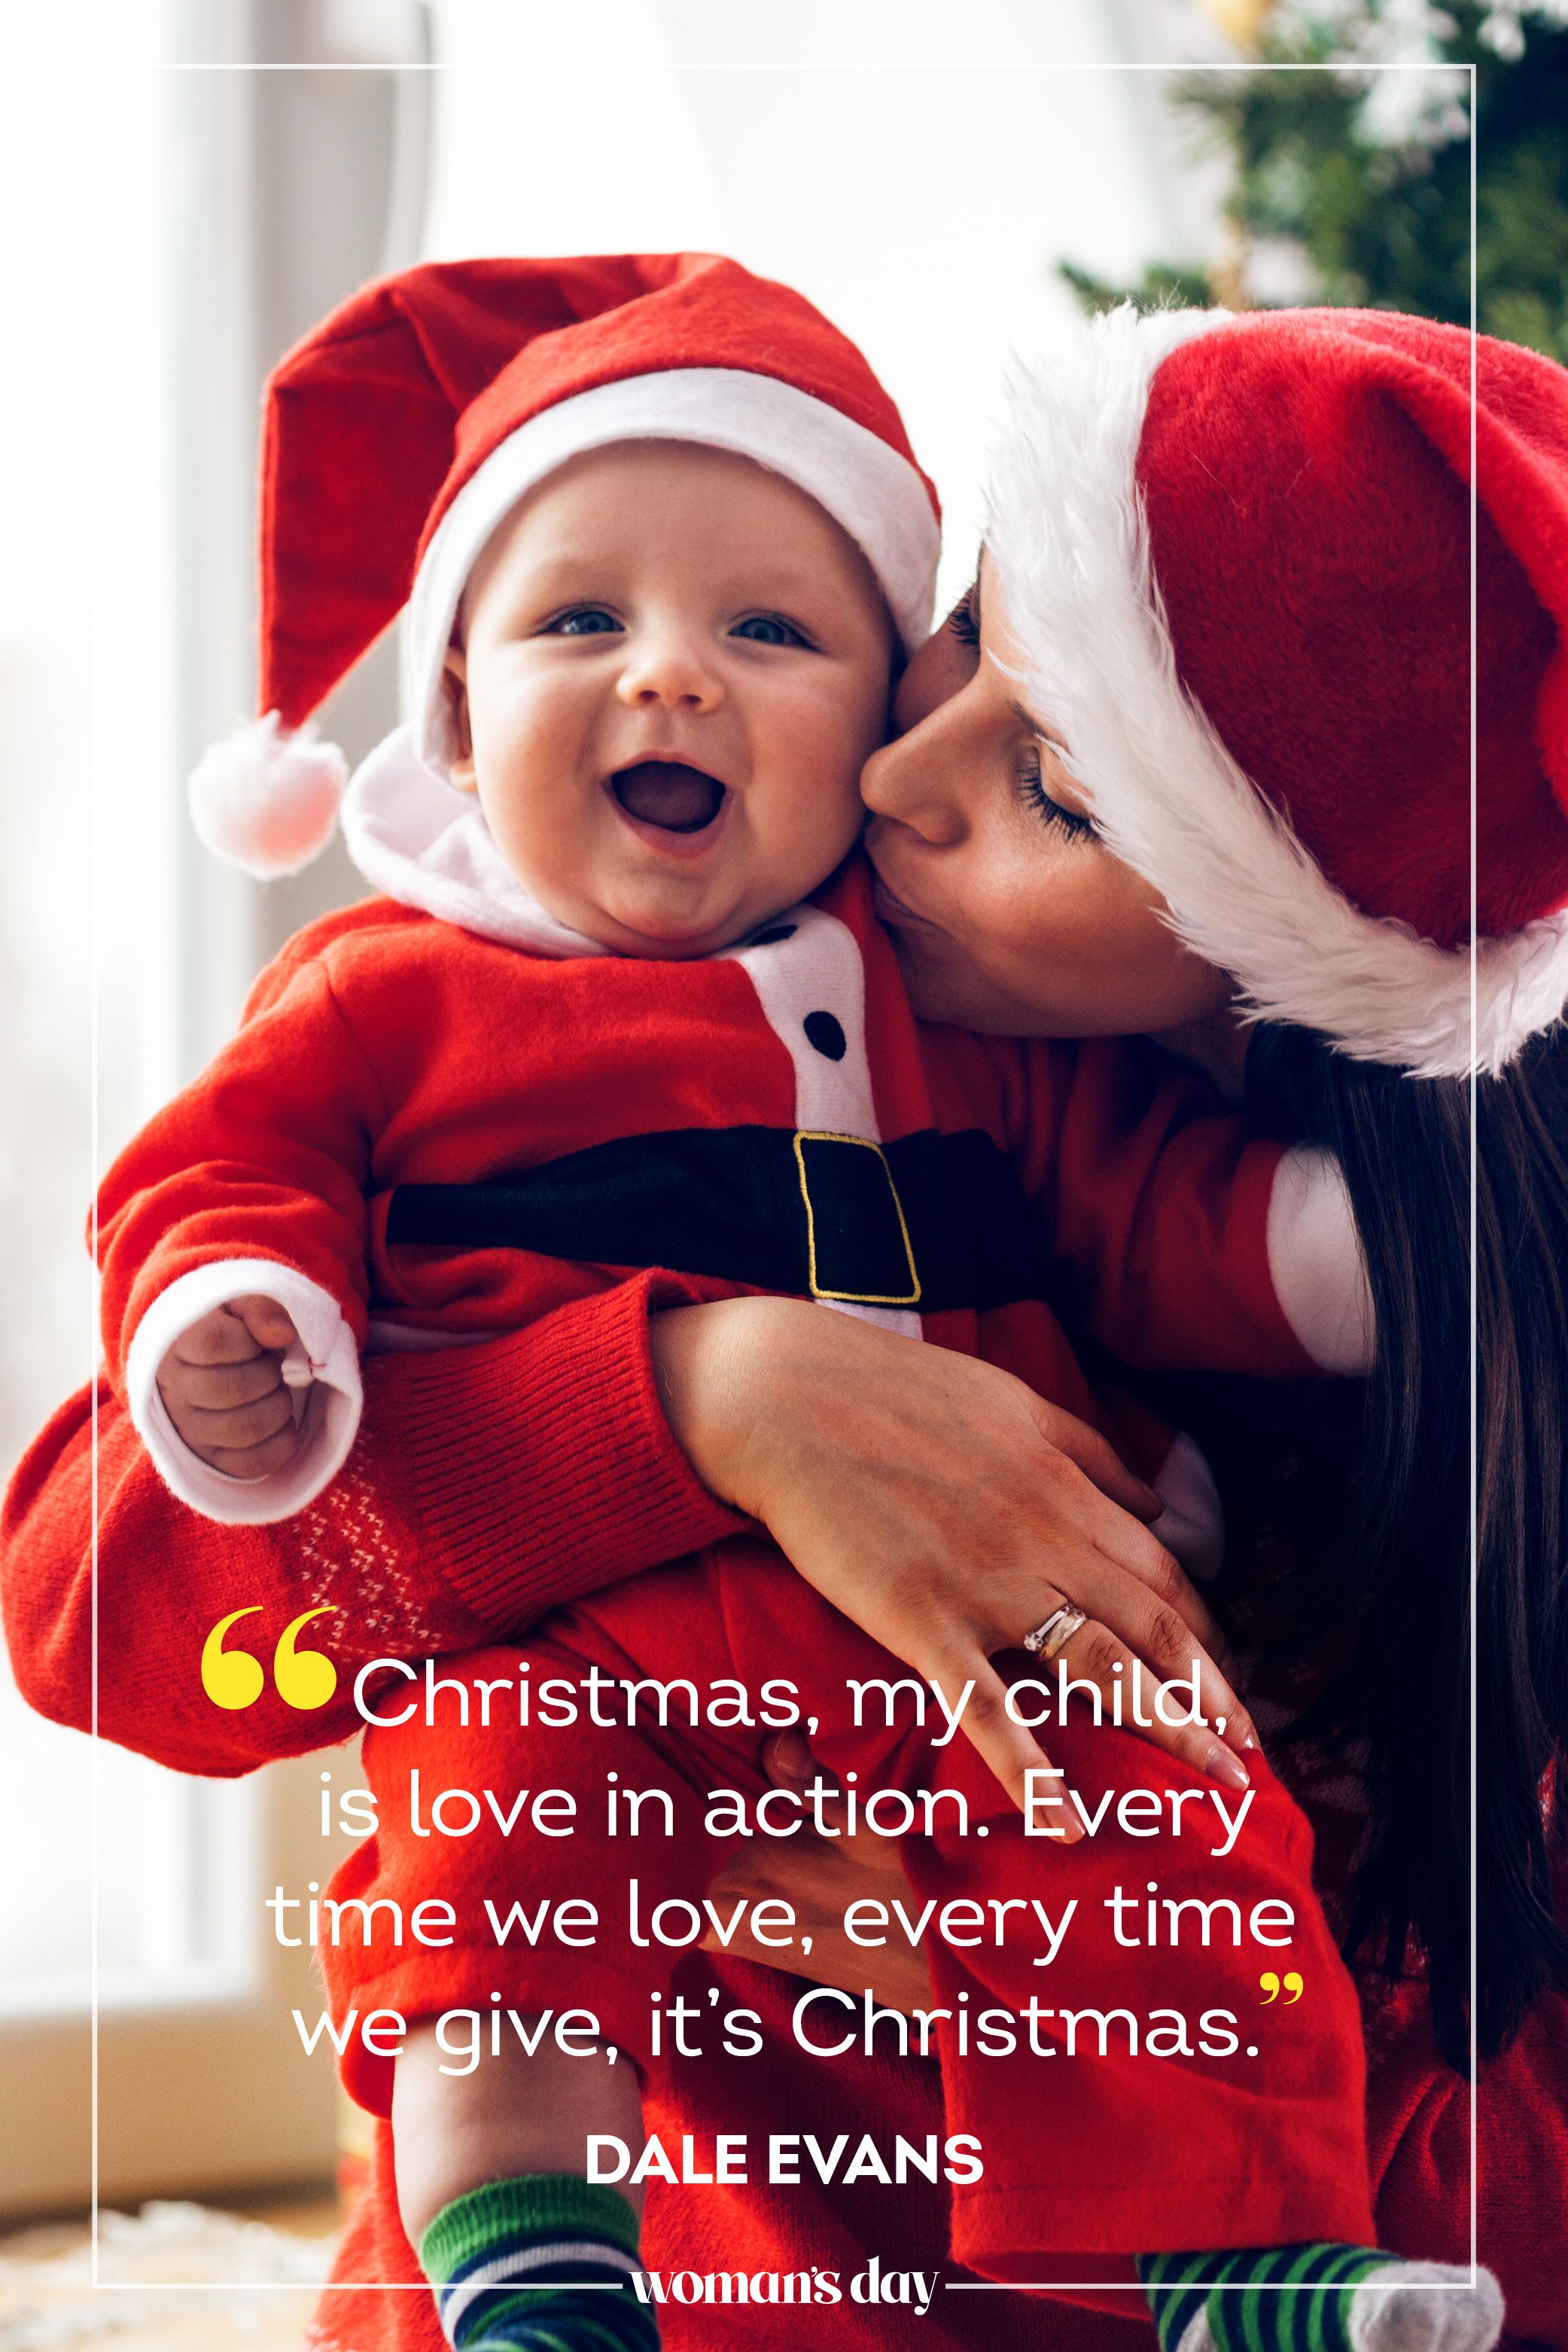 merry christmas quotes for friends